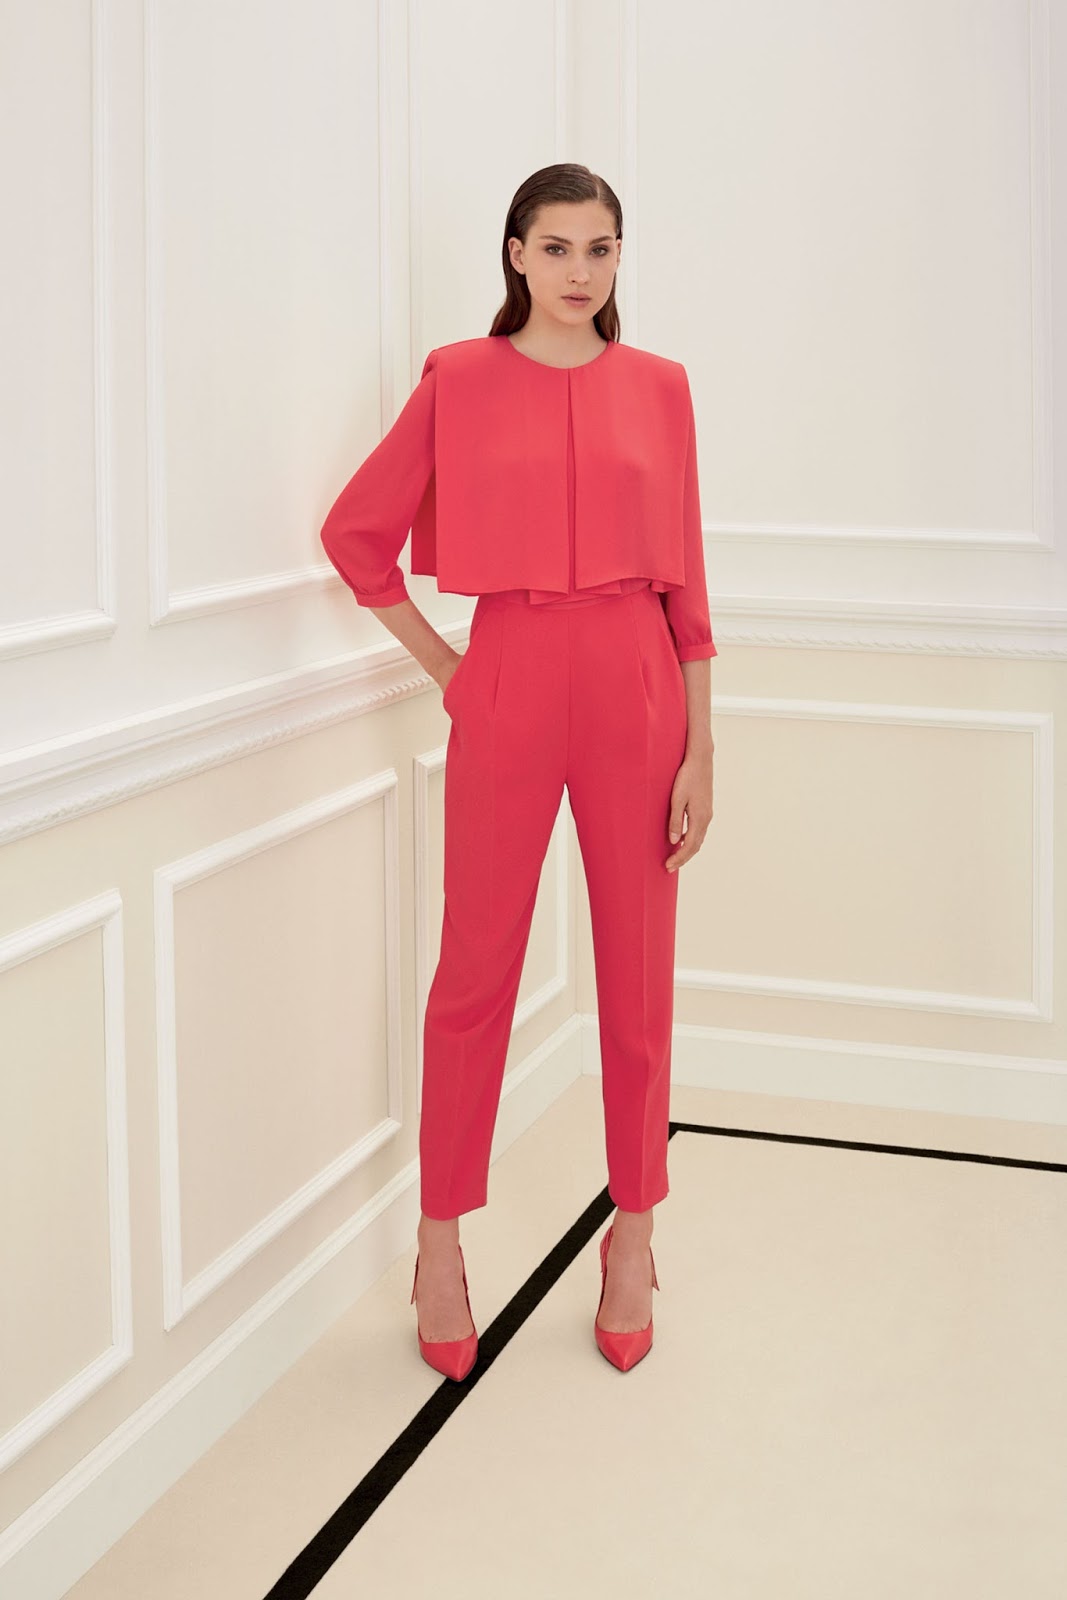 Eniwhere Fashion - Jumpsuits trend